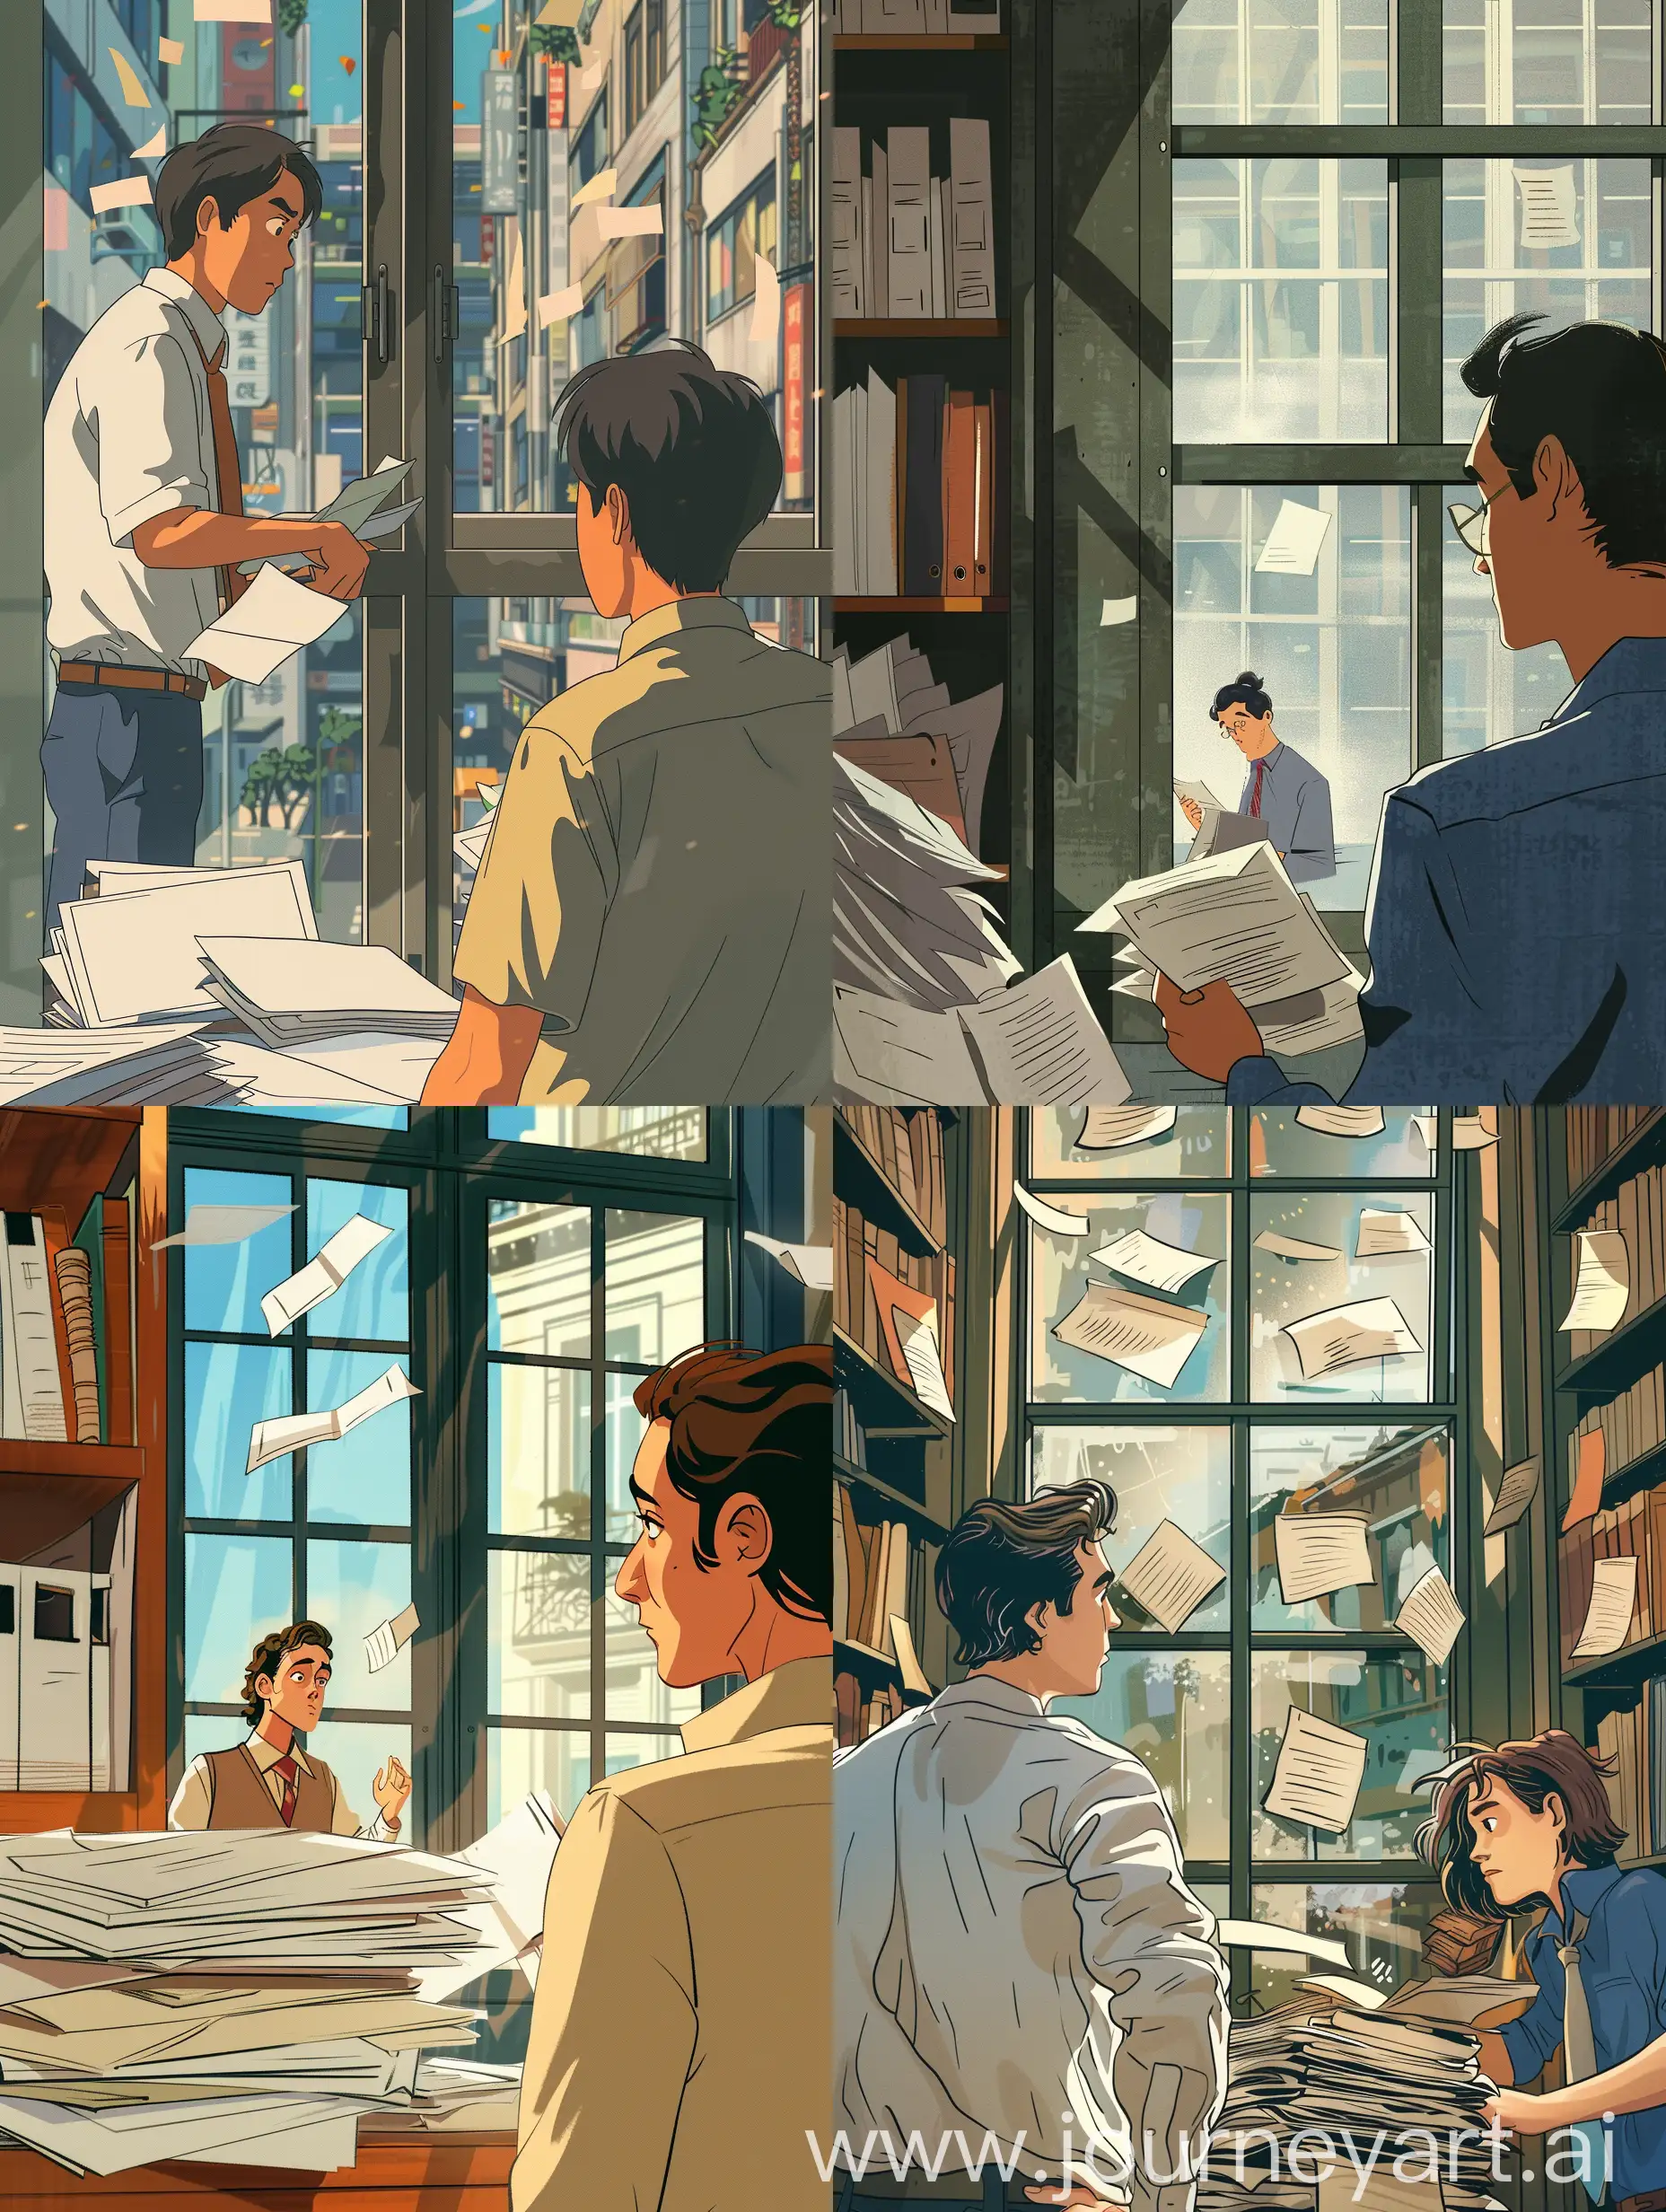 In a bustling office, a person gazes out of a window as their colleague fumbles with a pile of papers, animated style